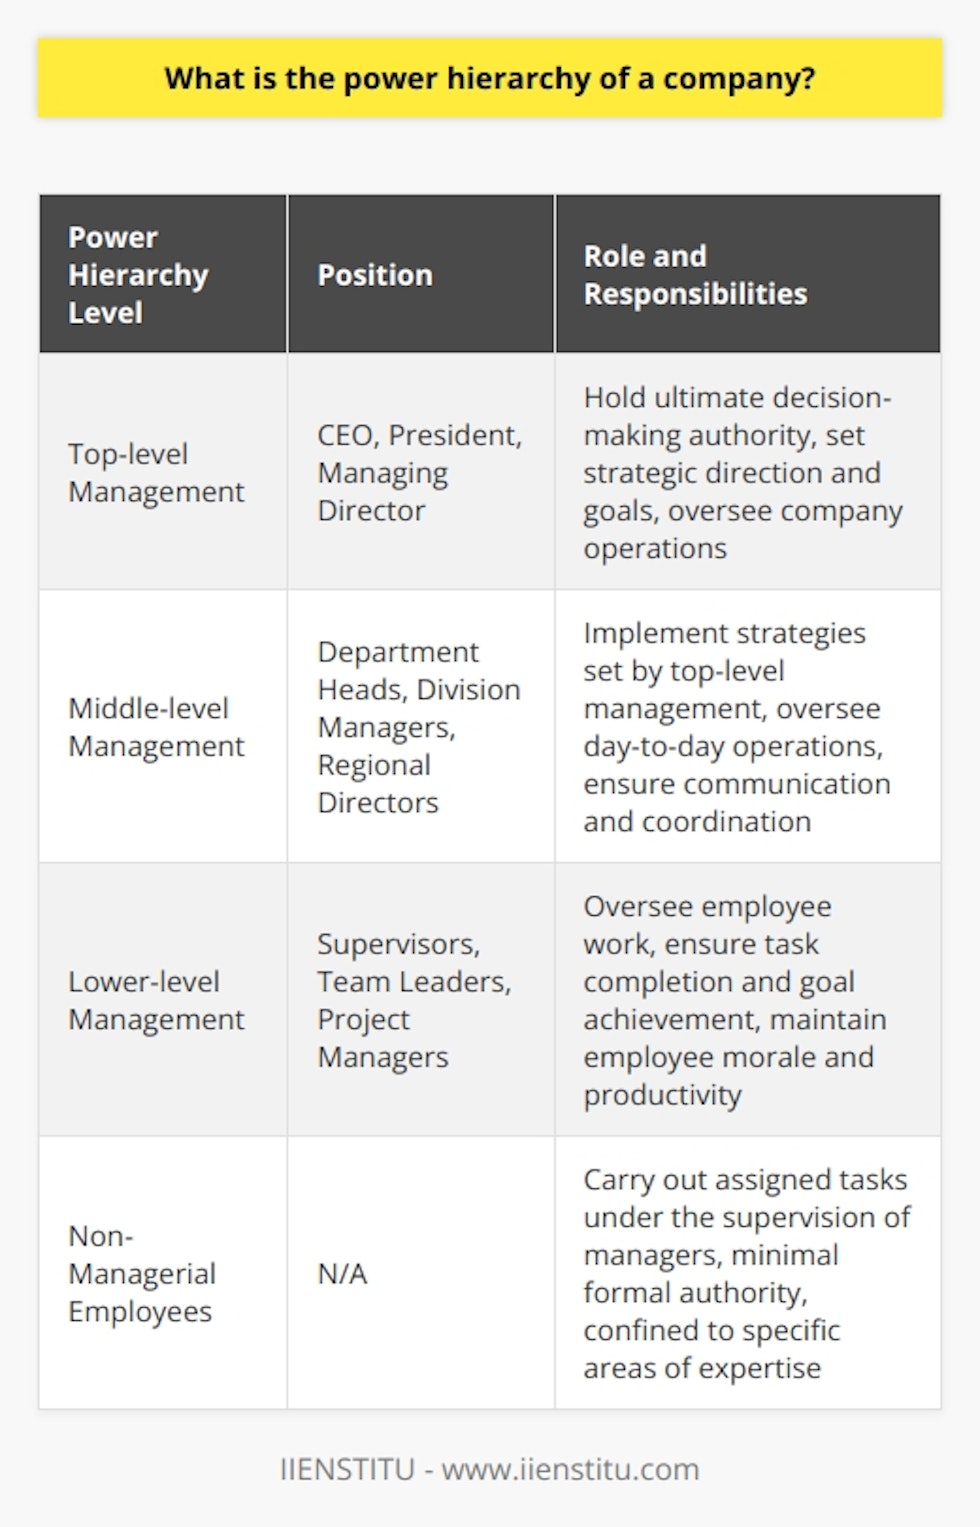 Understanding the power hierarchy within a company is essential for grasping its organizational structure and ensuring effective management. The power hierarchy refers to the distribution of authority, responsibility, and decision-making power among the members of a company.At the top of the power hierarchy are top-level management positions such as the CEO, president, or managing director. These individuals hold the ultimate decision-making authority and are responsible for setting the overall strategic direction and goals of the company. They play a crucial role in shaping the company's future and overseeing its operations.Below top-level management, we find middle-level management. These individuals hold titles such as department heads, division managers, and regional directors. Their role is to implement the strategies set by top-level management and oversee the day-to-day operations of their respective departments or divisions. They serve as a vital link between top-level and lower-level management, ensuring efficient communication and coordination throughout the company.Lower-level management consists of supervisors, team leaders, and project managers. Their responsibility is to oversee the work of individual employees, ensuring that tasks are completed and goals are met. They are more involved in the day-to-day operations of the company and have regular interaction with employees. Their role is crucial in maintaining employee morale and productivity.At the base of the power hierarchy are non-managerial employees. These individuals have no formal authority over others and carry out their assigned tasks under the supervision of their managers. Their level of influence within the company is typically minimal and confined to their specific areas of expertise.The power hierarchy within a company has a significant impact on its functioning. A well-defined hierarchy enables smoother operations by clarifying roles and responsibilities and facilitating efficient communication. It ensures that tasks are delegated appropriately and that decisions can be made with clarity and efficiency. However, a poorly defined or excessively rigid hierarchy may hinder innovation and creativity by discouraging collaboration among different levels or departments. It is crucial for companies to strike a balance in their power hierarchies to foster a culture of collaboration and innovation while maintaining effective management.In conclusion, understanding the power hierarchy within a company is crucial for understanding its organizational structure and ensuring effective management. It influences operational efficiency, decision-making processes, communication, and culture. As companies continue to evolve, it is important for employees and leaders to recognize the significance of power hierarchies in shaping the overall success and competitiveness of their organizations.